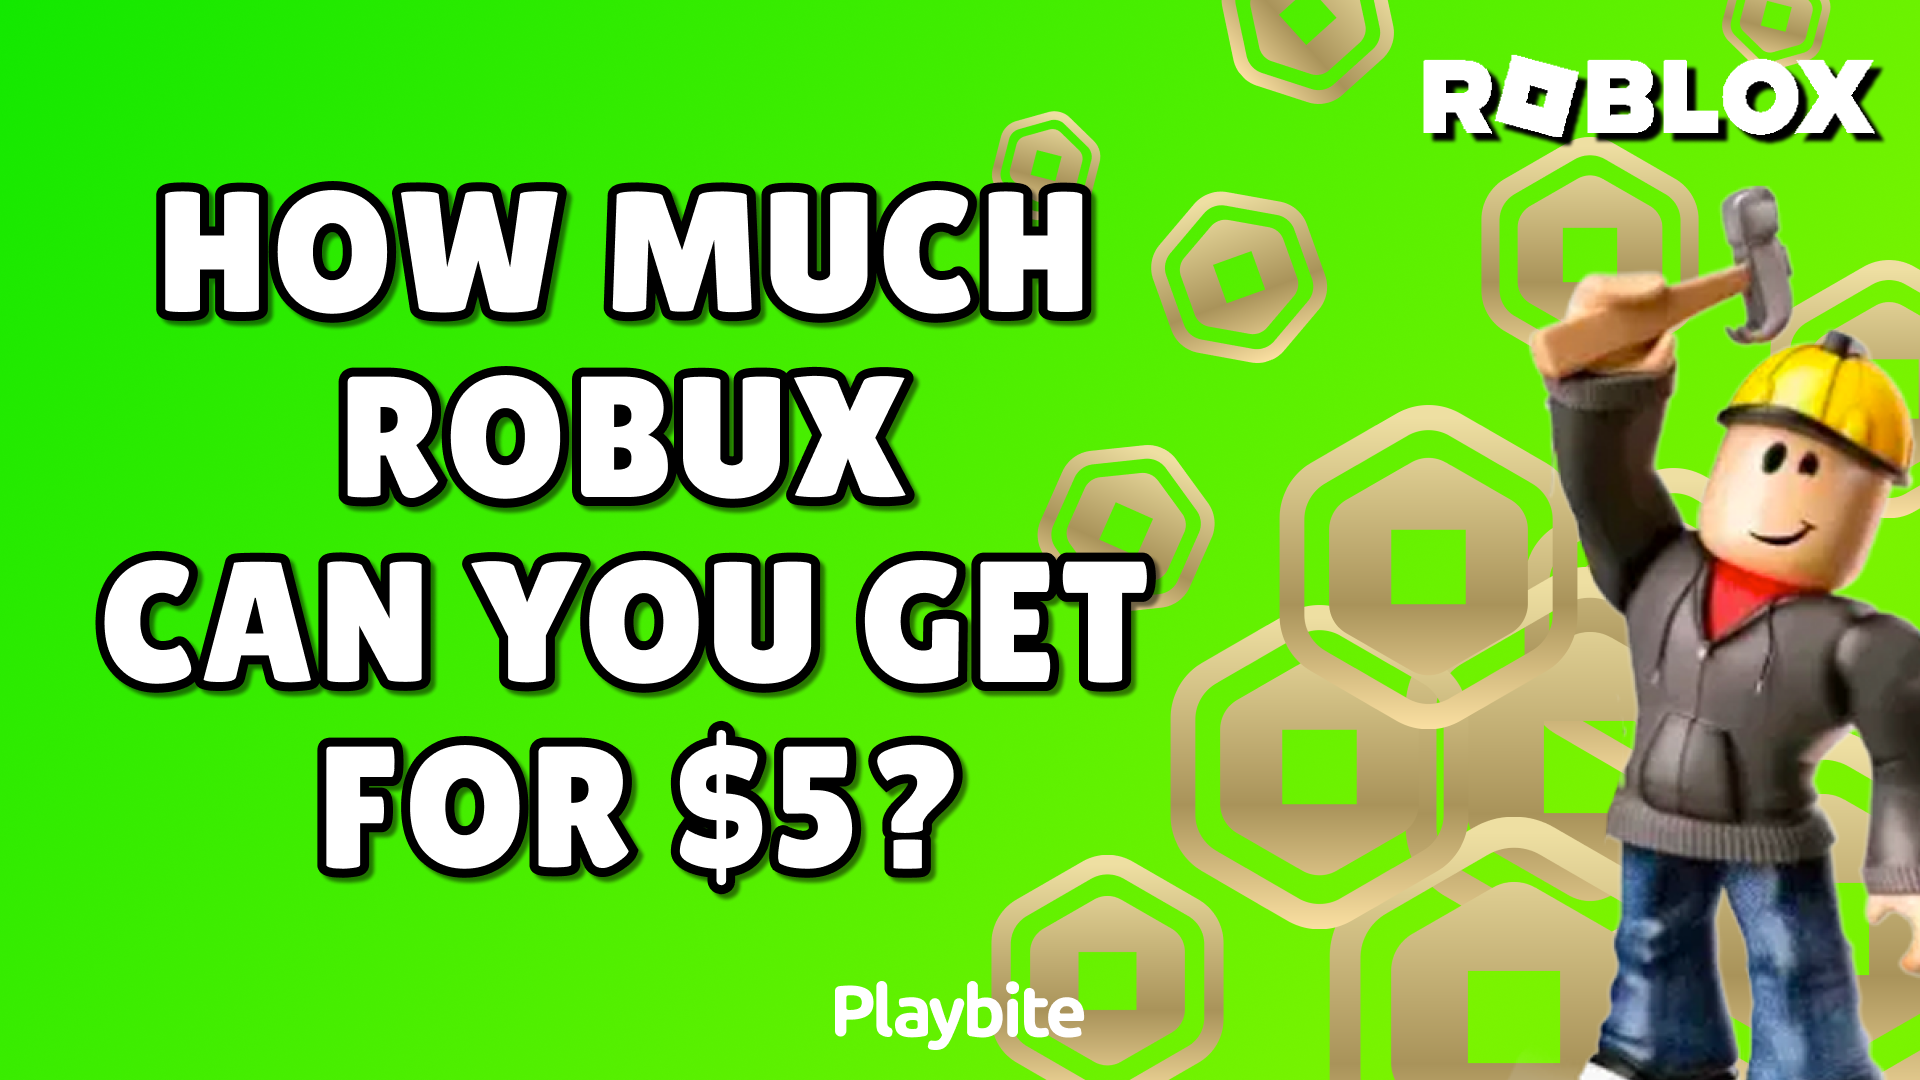 How Much Robux Can You Get for $5?